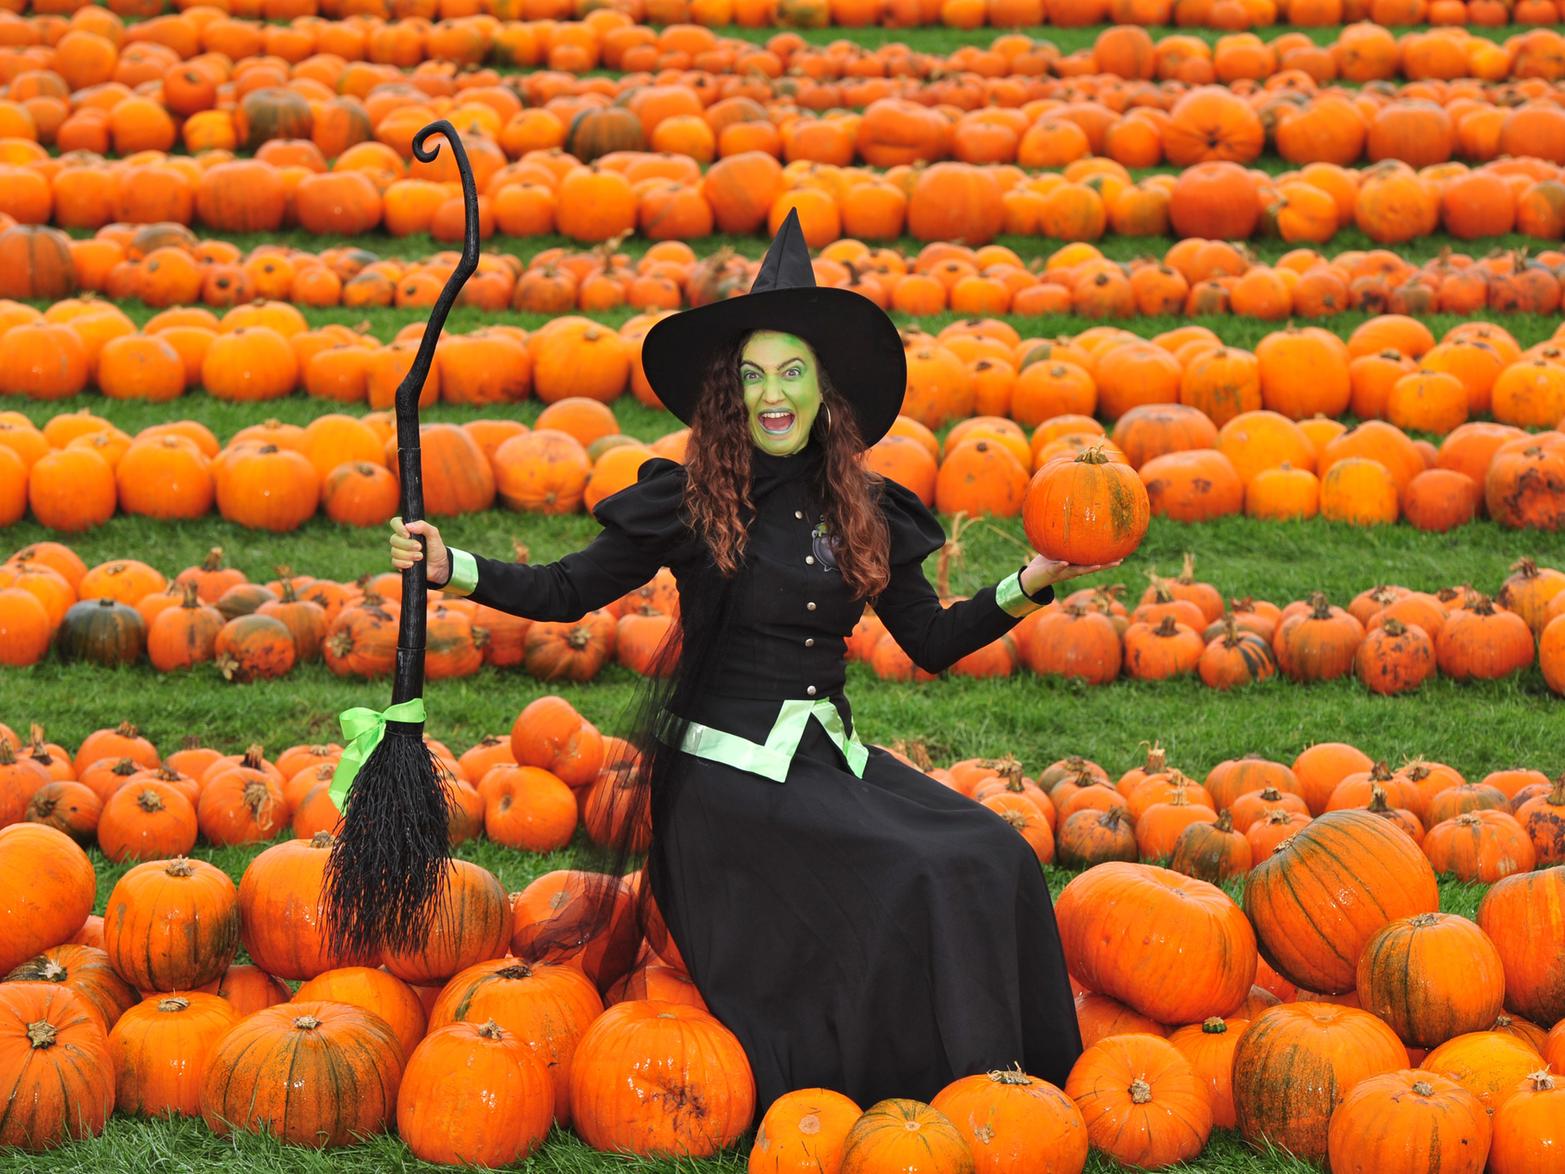 Annie the witch in the pumpkin field at Stockeld Park, LS22 4AN (open daily, October 26 - 31, 10.30am - 5.30pm, booking required).